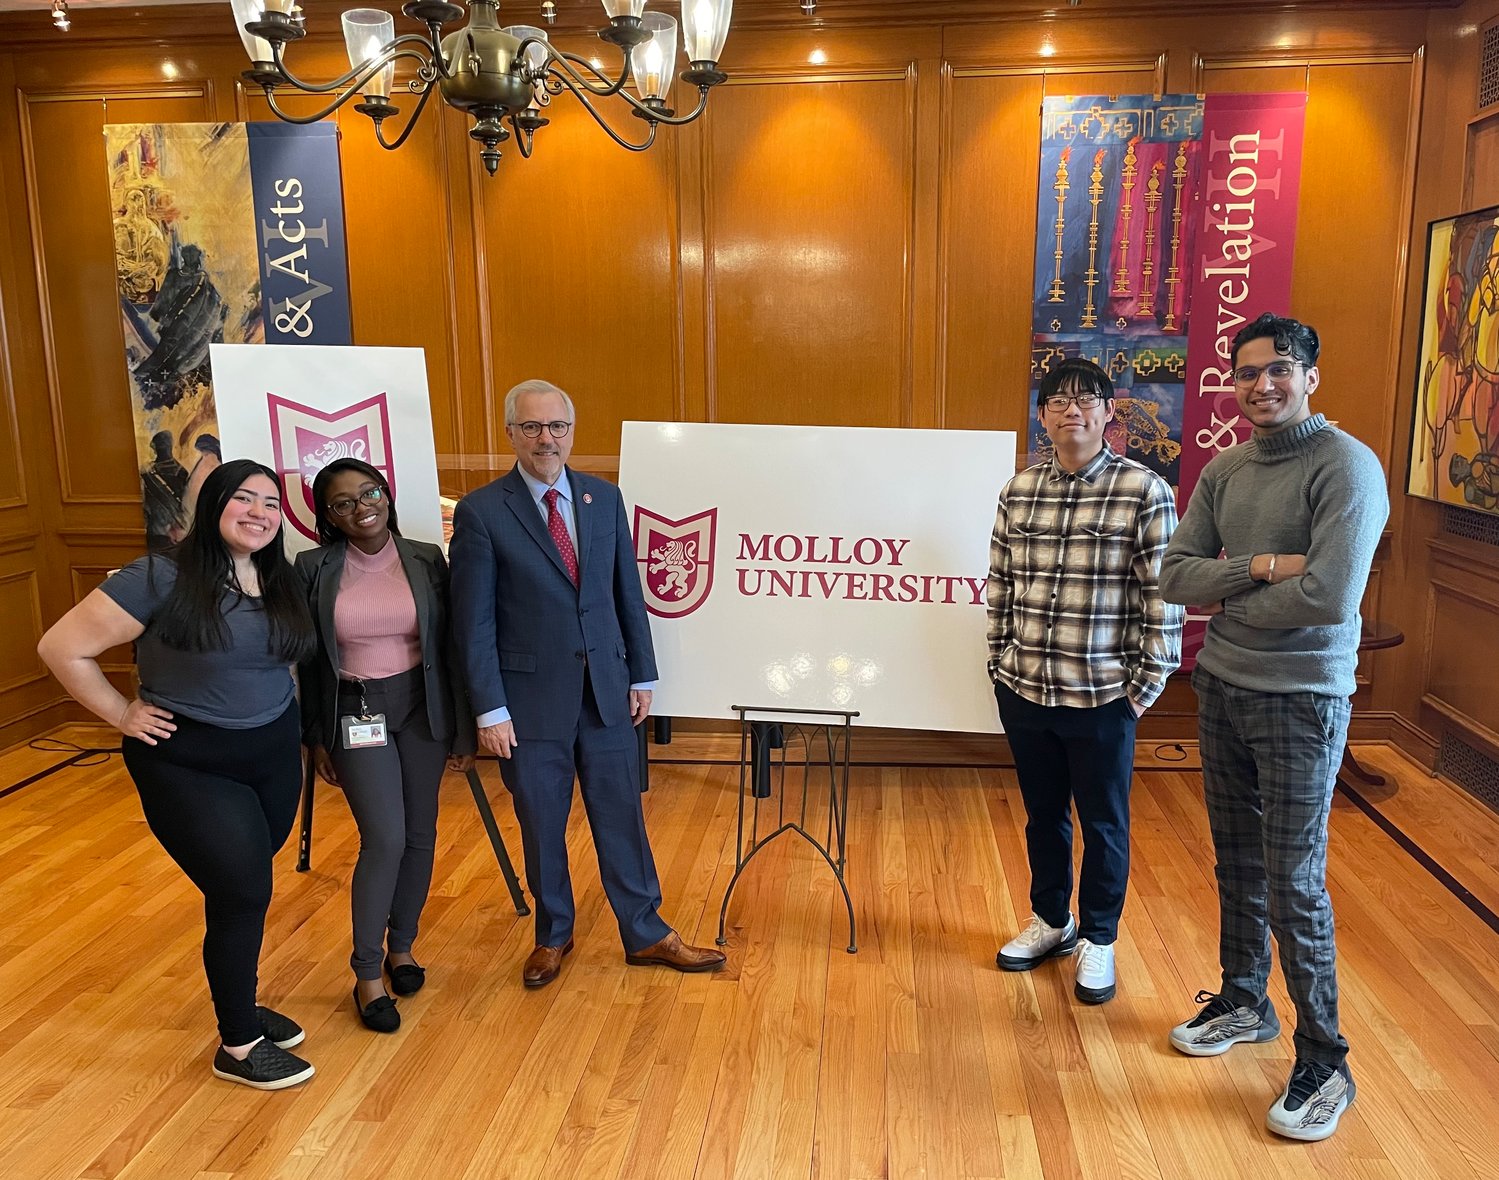 Molloy College president James Lentini shows students the new logo for Molloy University.